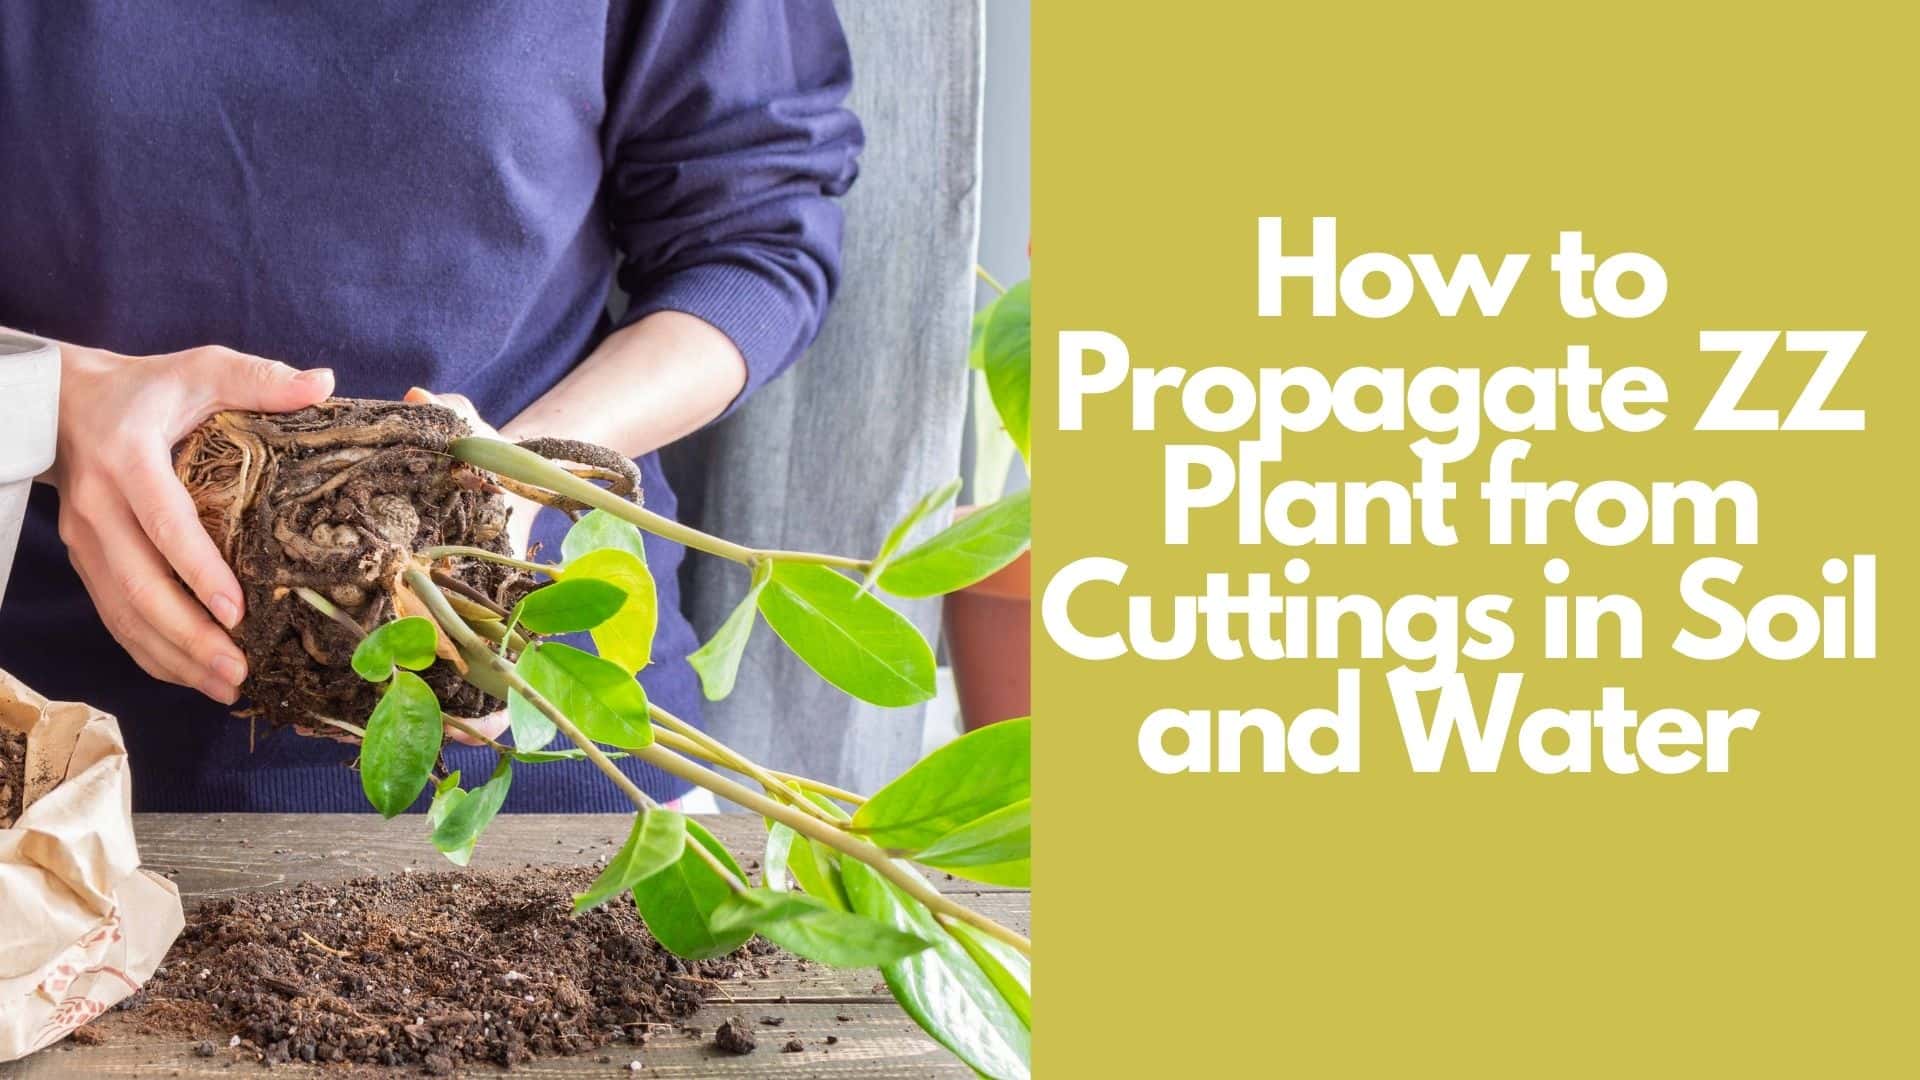 How to Propagate ZZ Plant from Cuttings in Soil and Water 